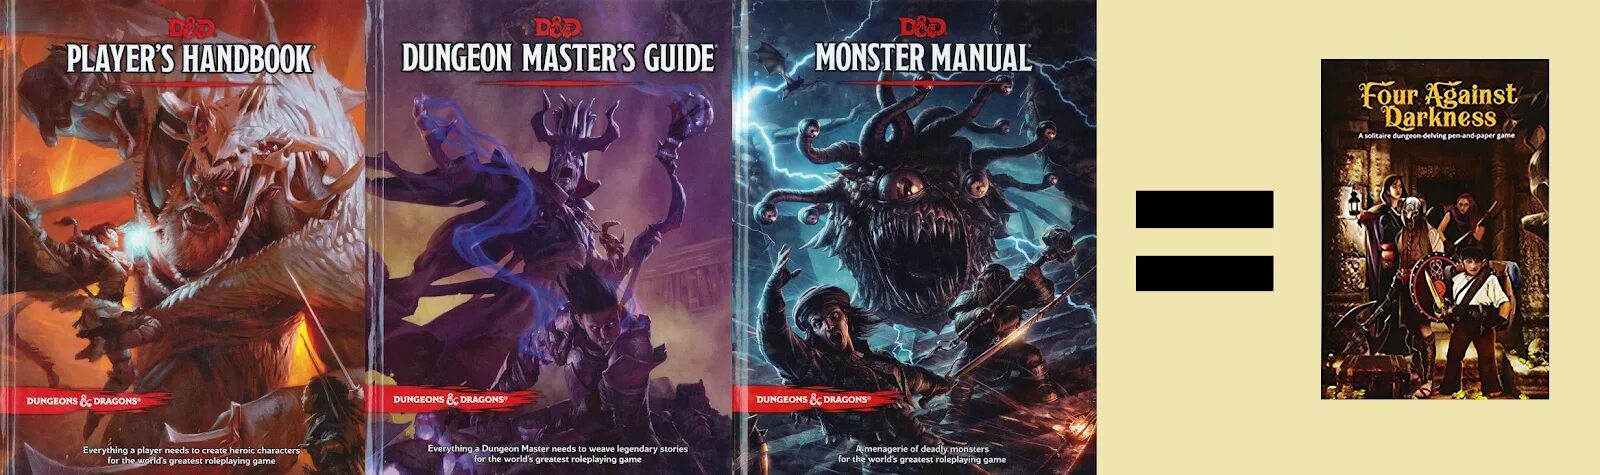 Players handbook. Dungeons and Dragons Player's Handbook. Dungeons & Dragons. Руководство мастера подземелий. Dungeon and Dragons Monster manual buy.